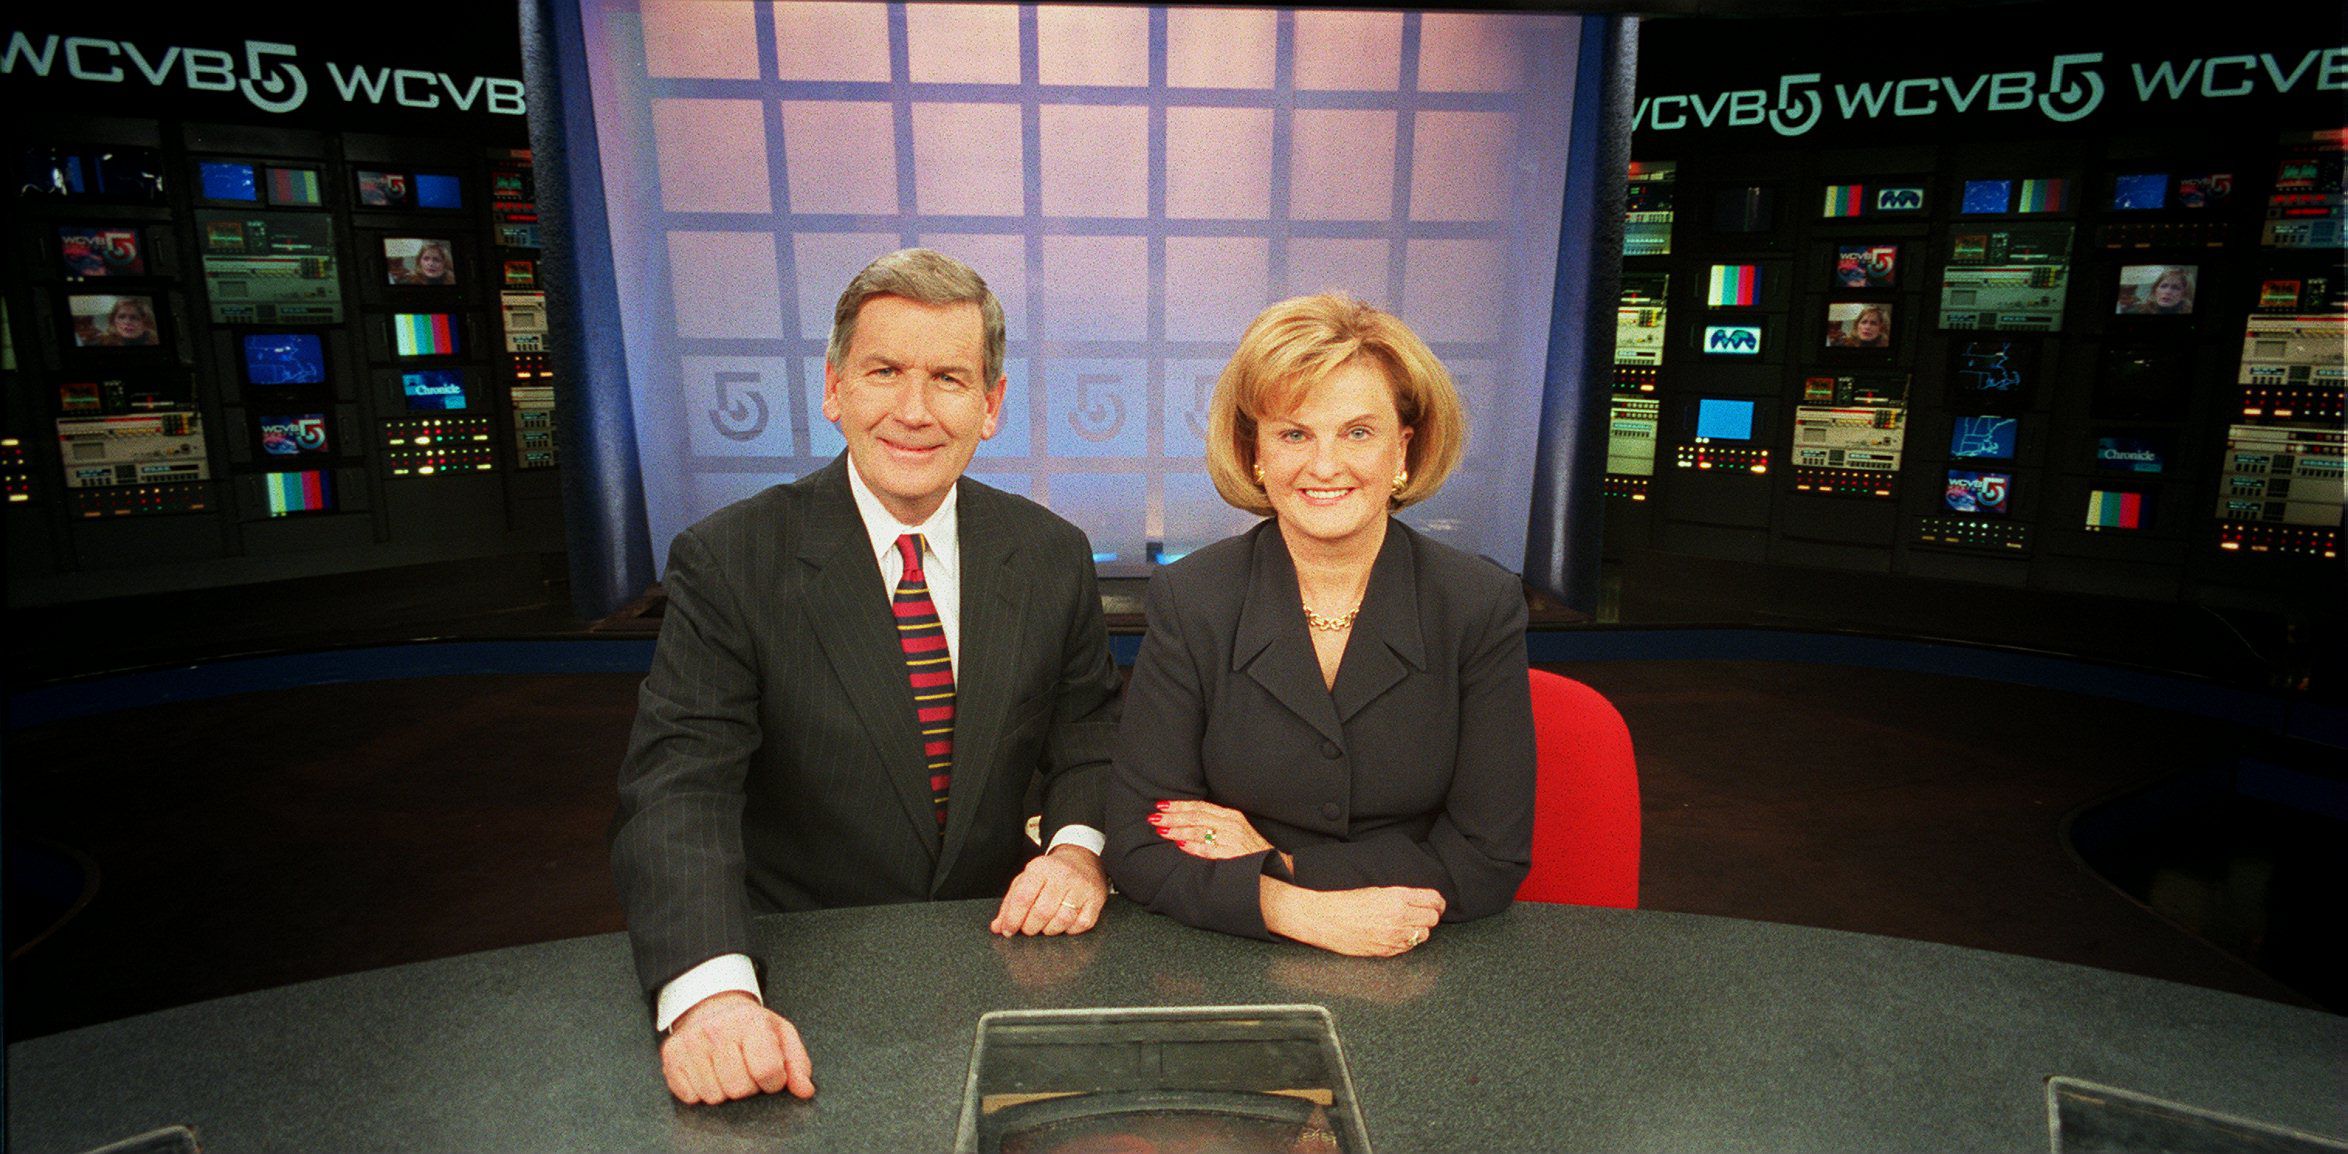 Mary Richardson, a prominent Boston broadcaster has died